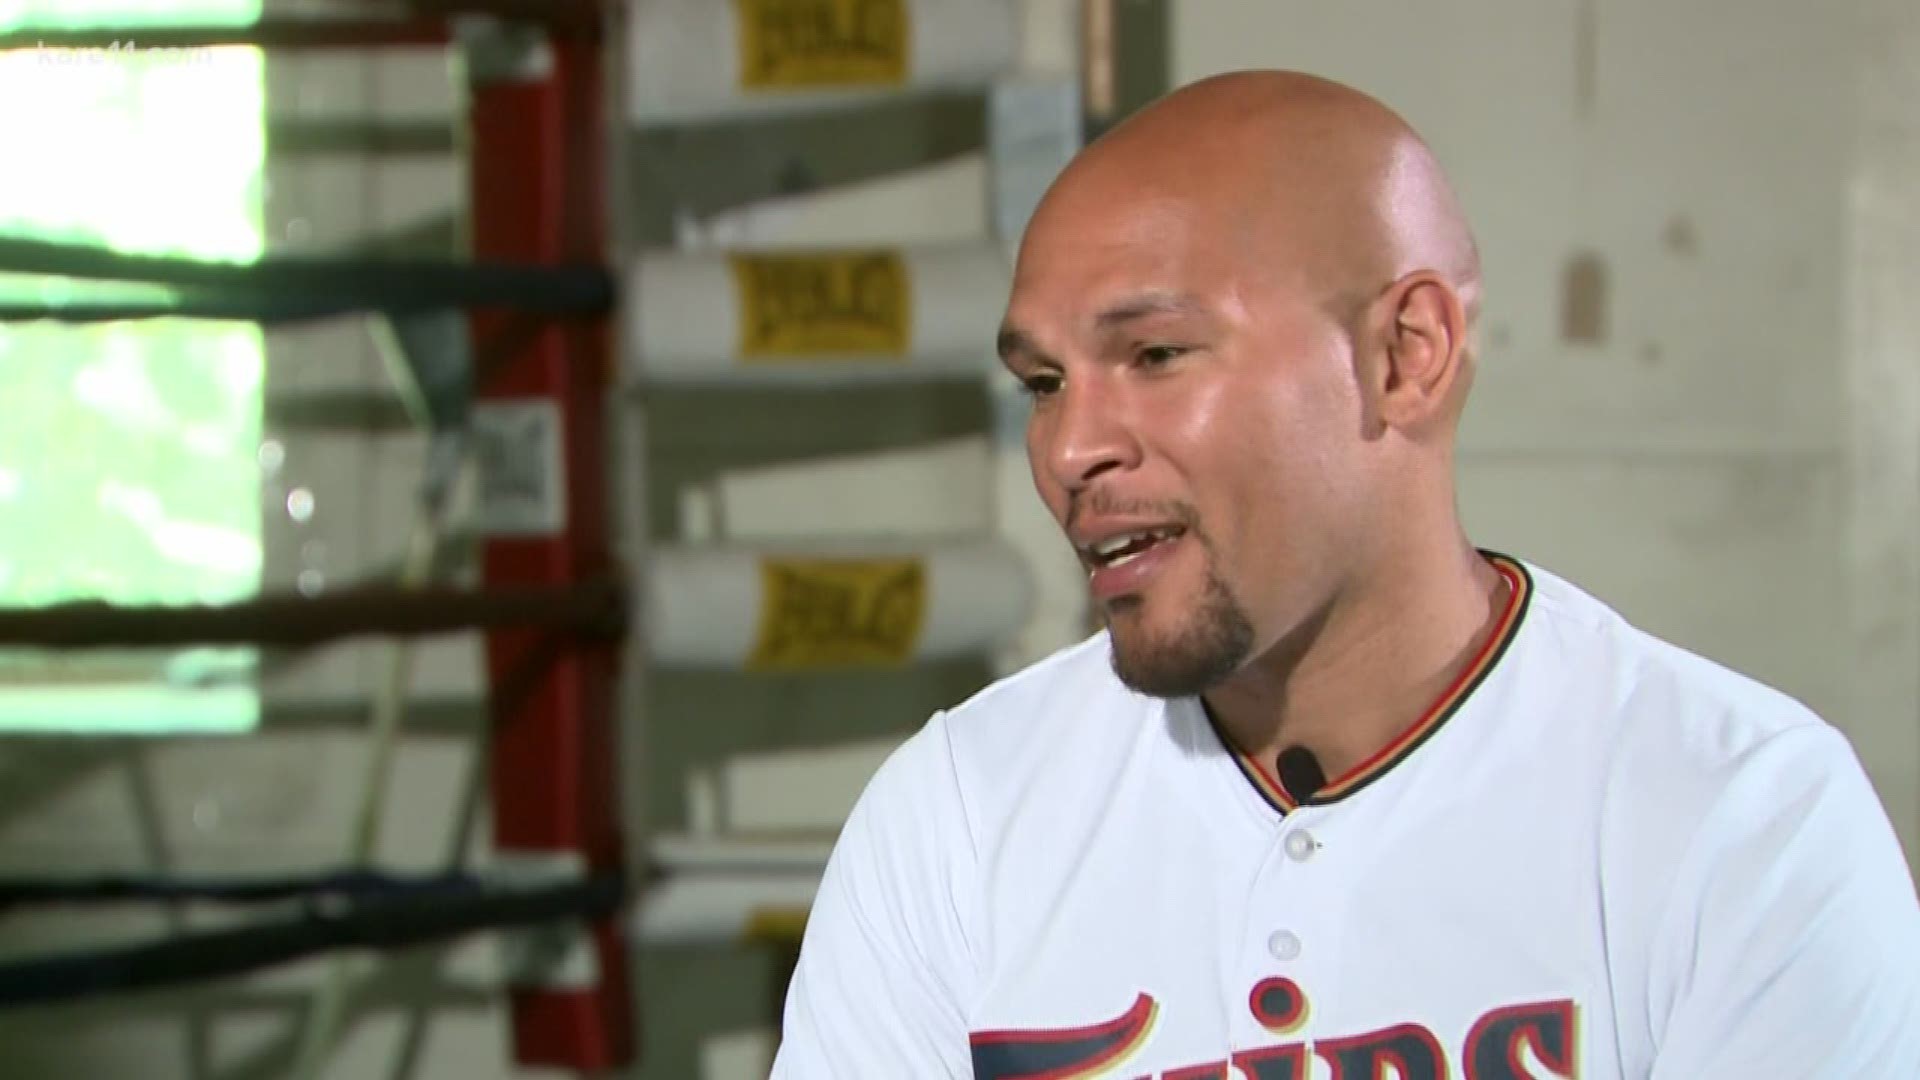 Caleb Truax will fight again next month in Minneapolis. And he knows that his window to get back to the top is closing. https://kare11.tv/2A1bkau